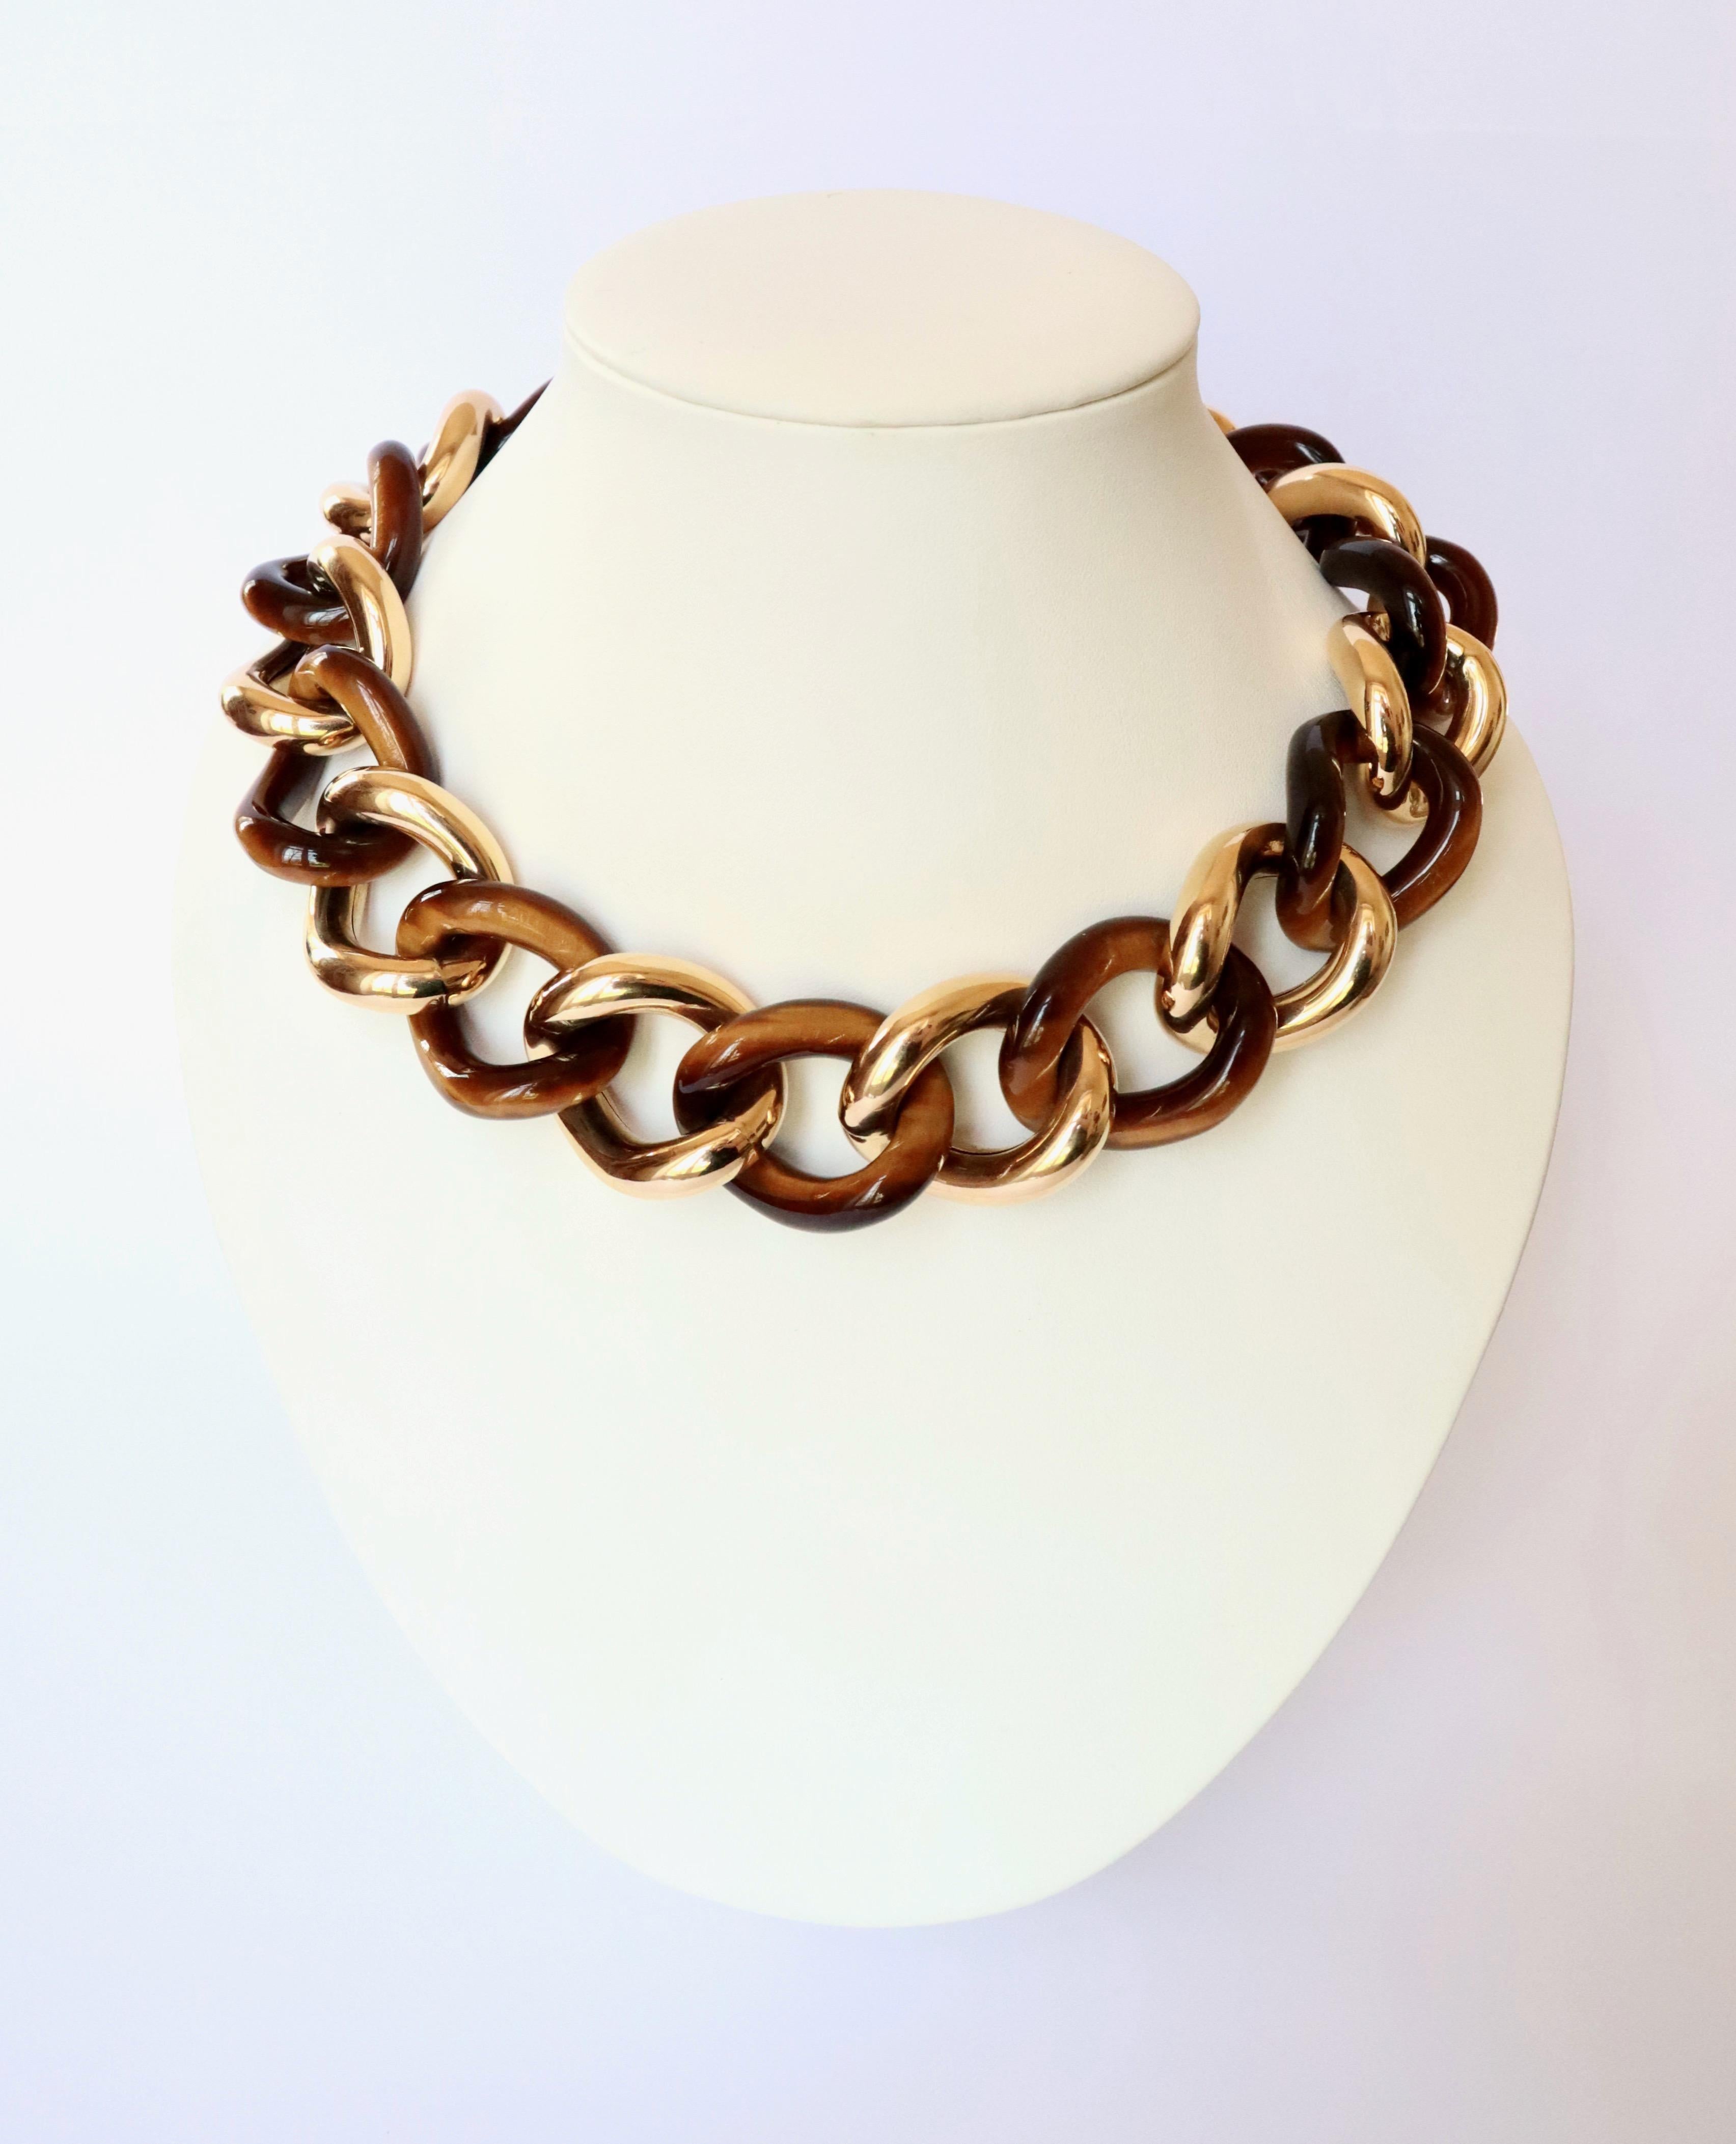 3 in 1 : The Necklace and the Bracelet can be attached together and form a Necklace 70 cm long.
Necklace in 18 kt yellow gold and Agate. Choker shaped, this American mesh necklace alternates Agate rings and gold rings.
Length: 48 cm Width: 3 cm